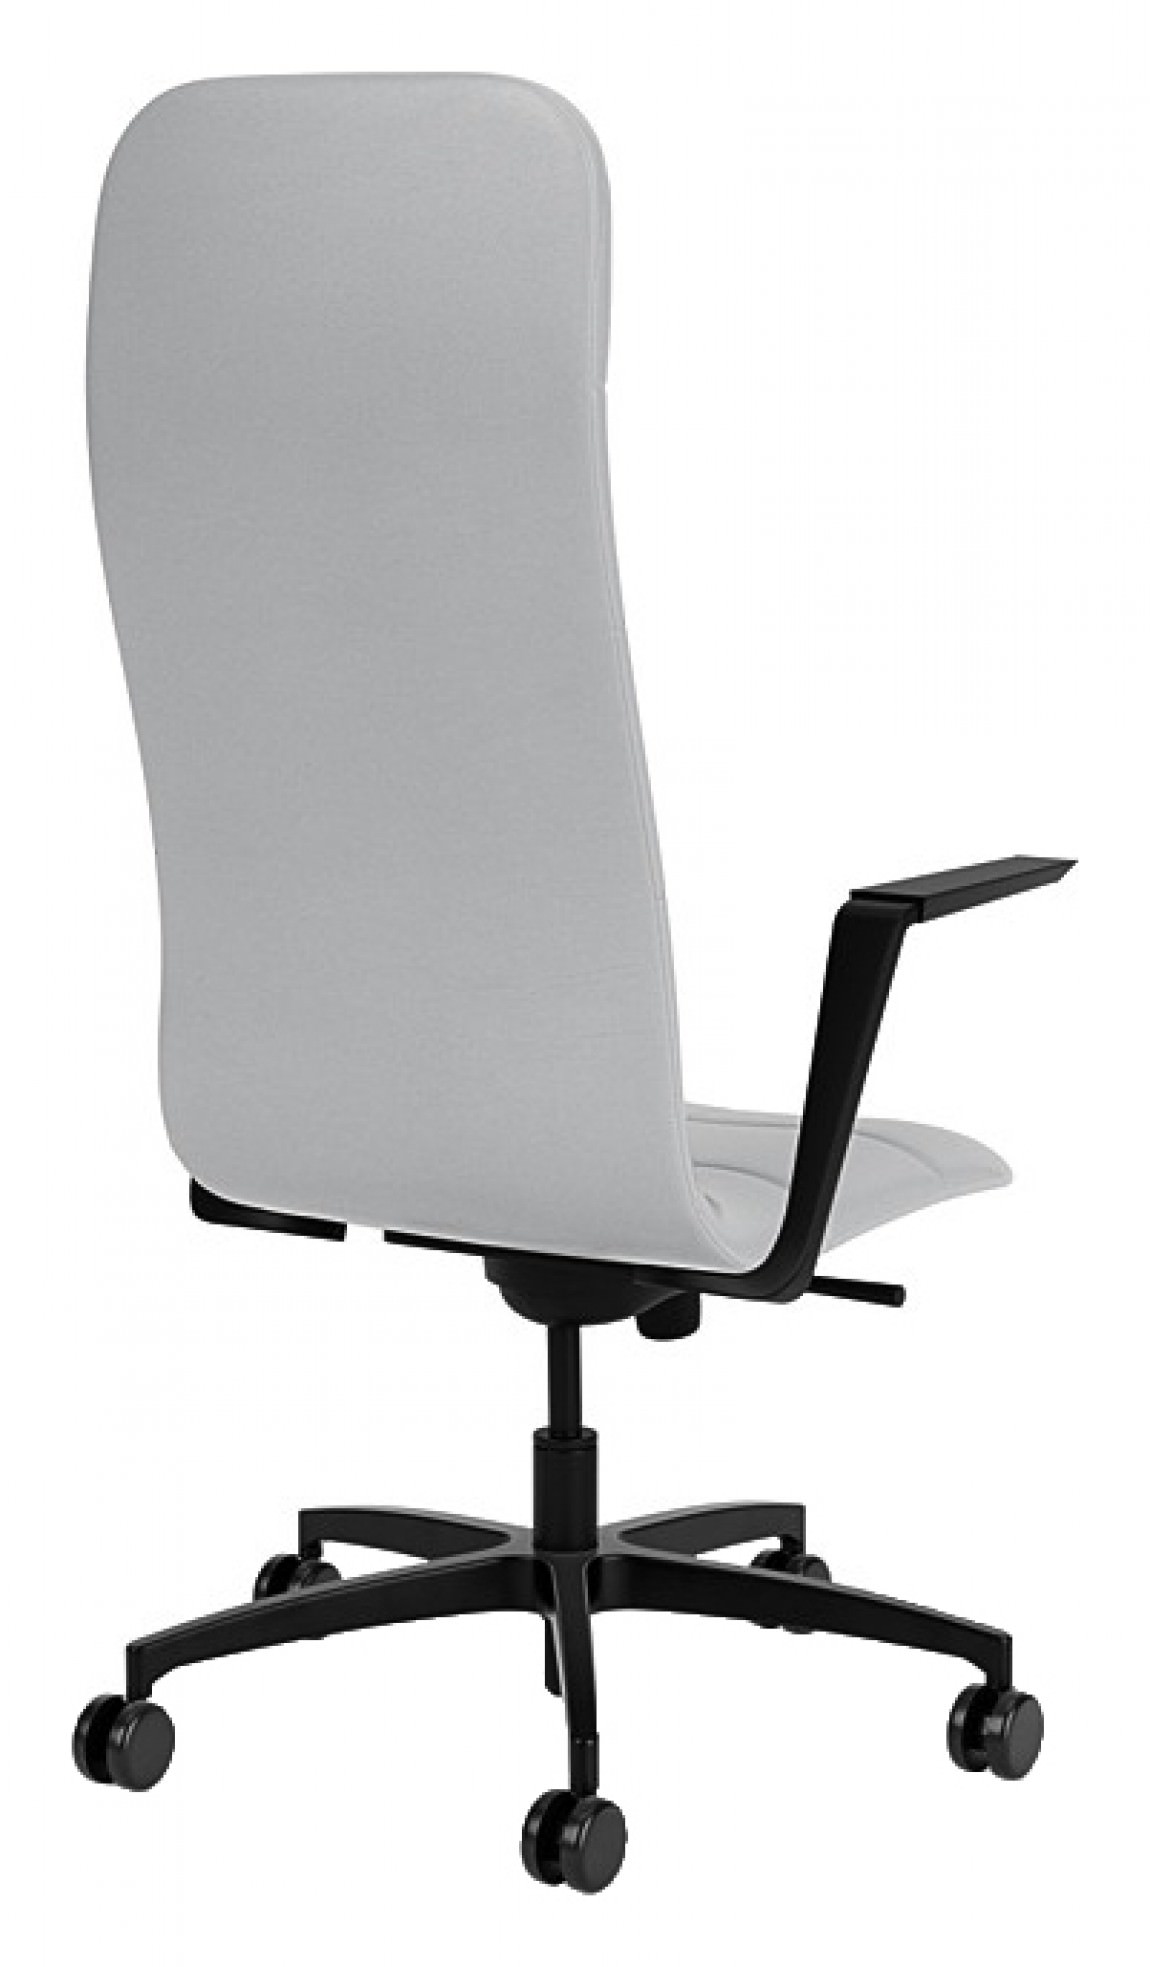 High Back Conference Chair with Arms